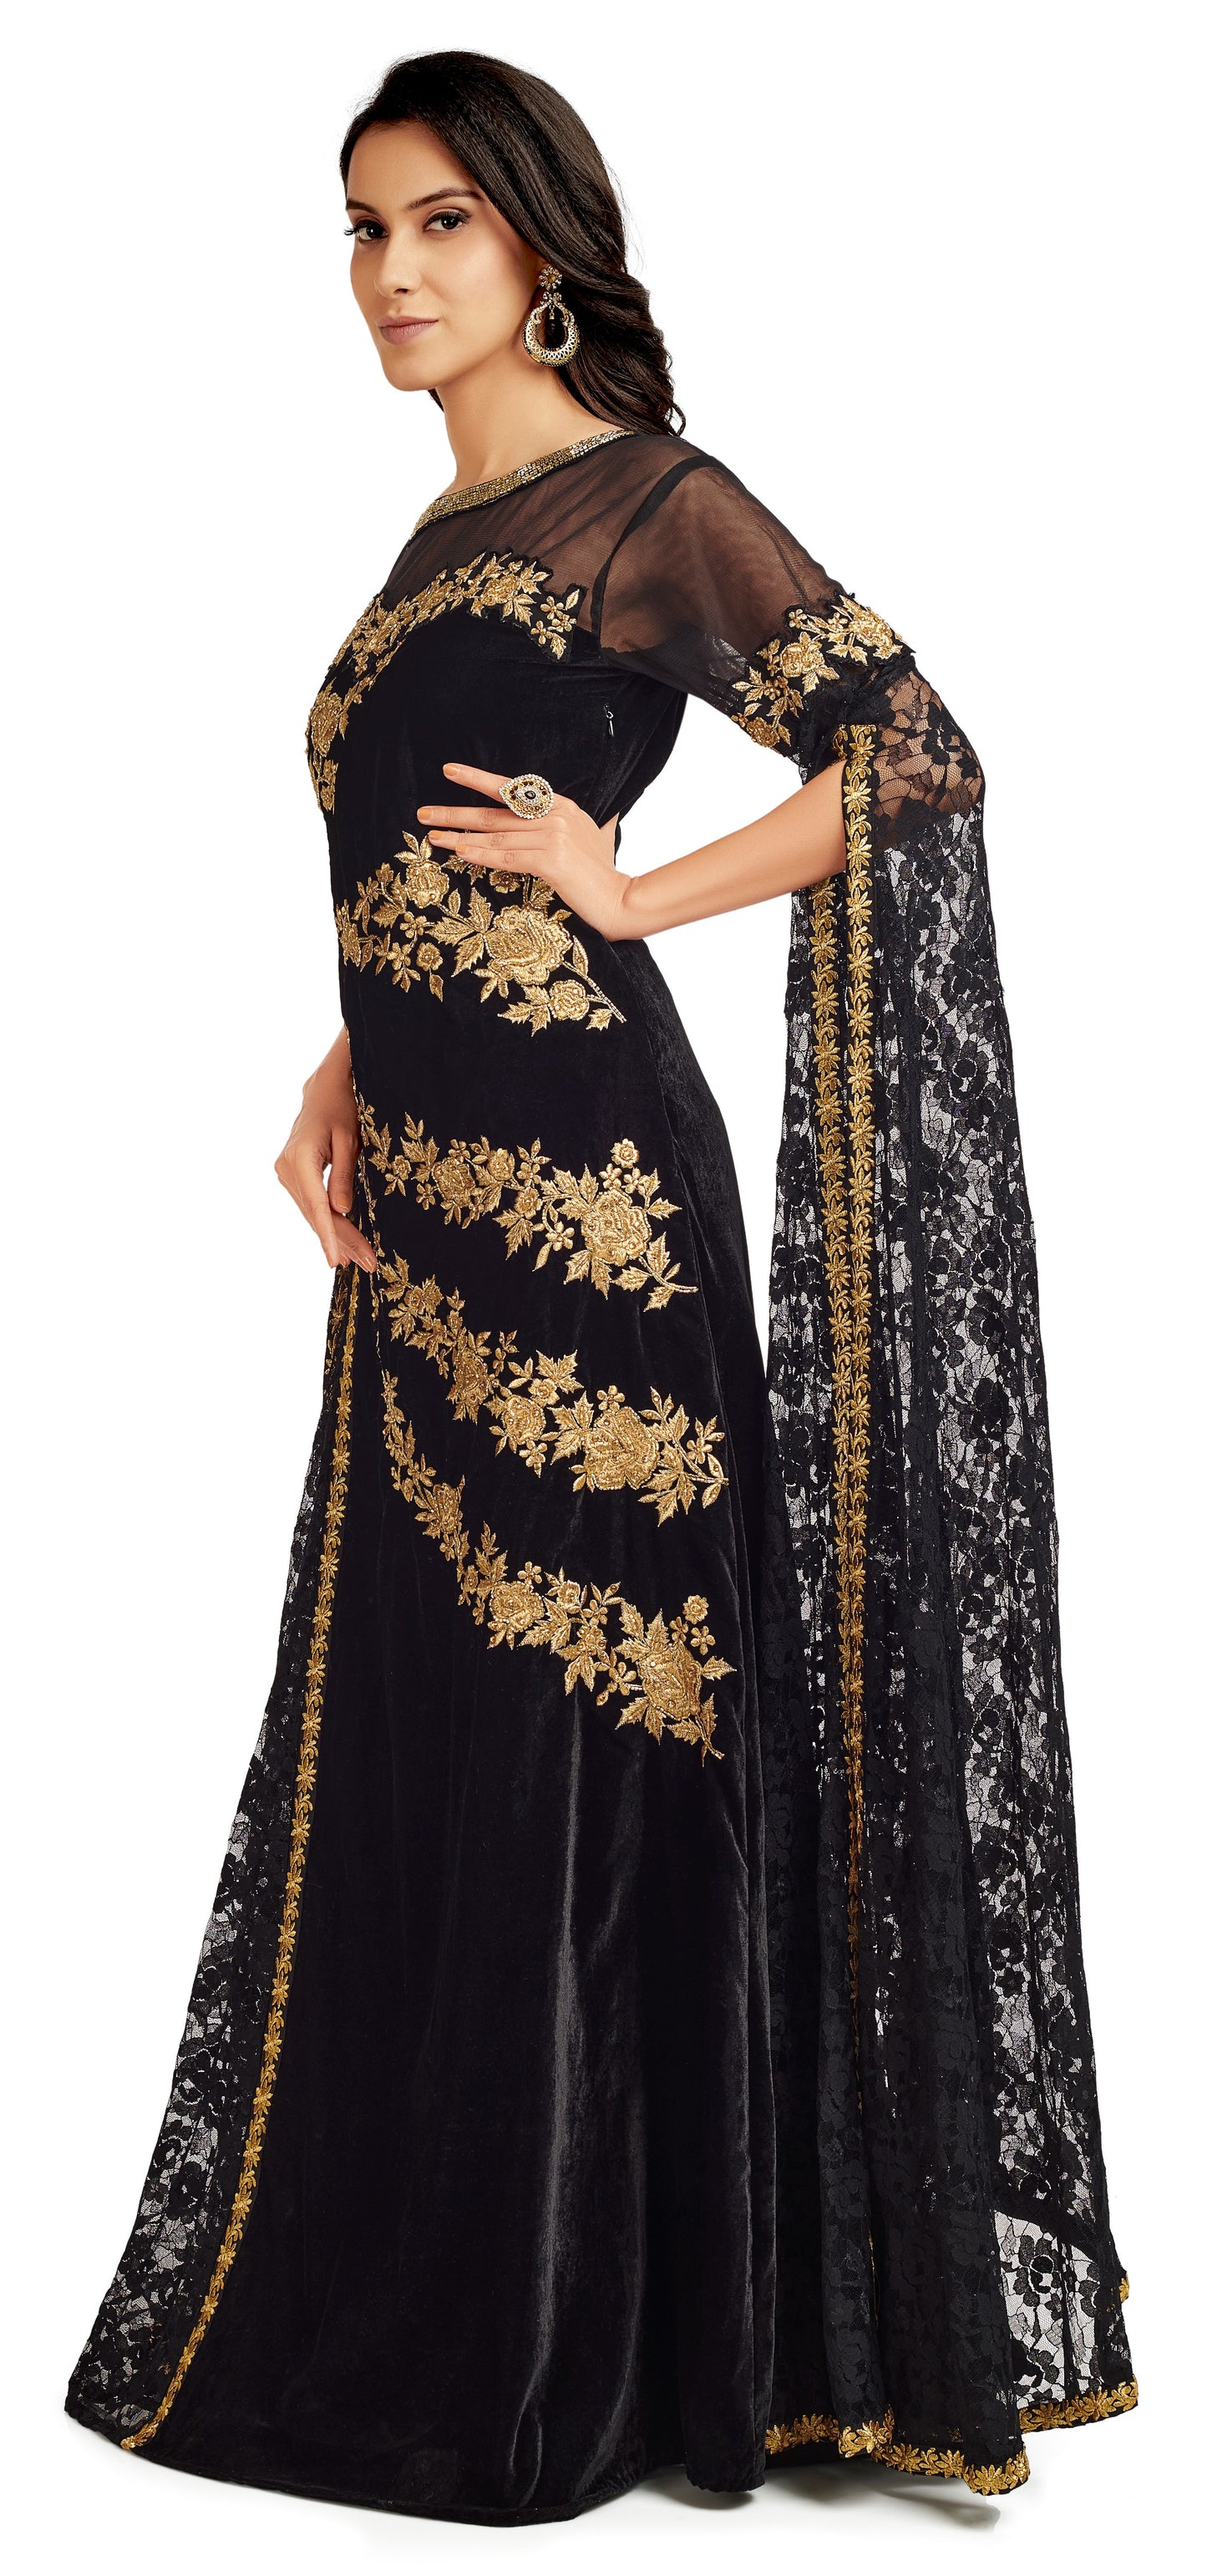 Black Velvet Party Gown with Long Sleeve - Maxim Creation